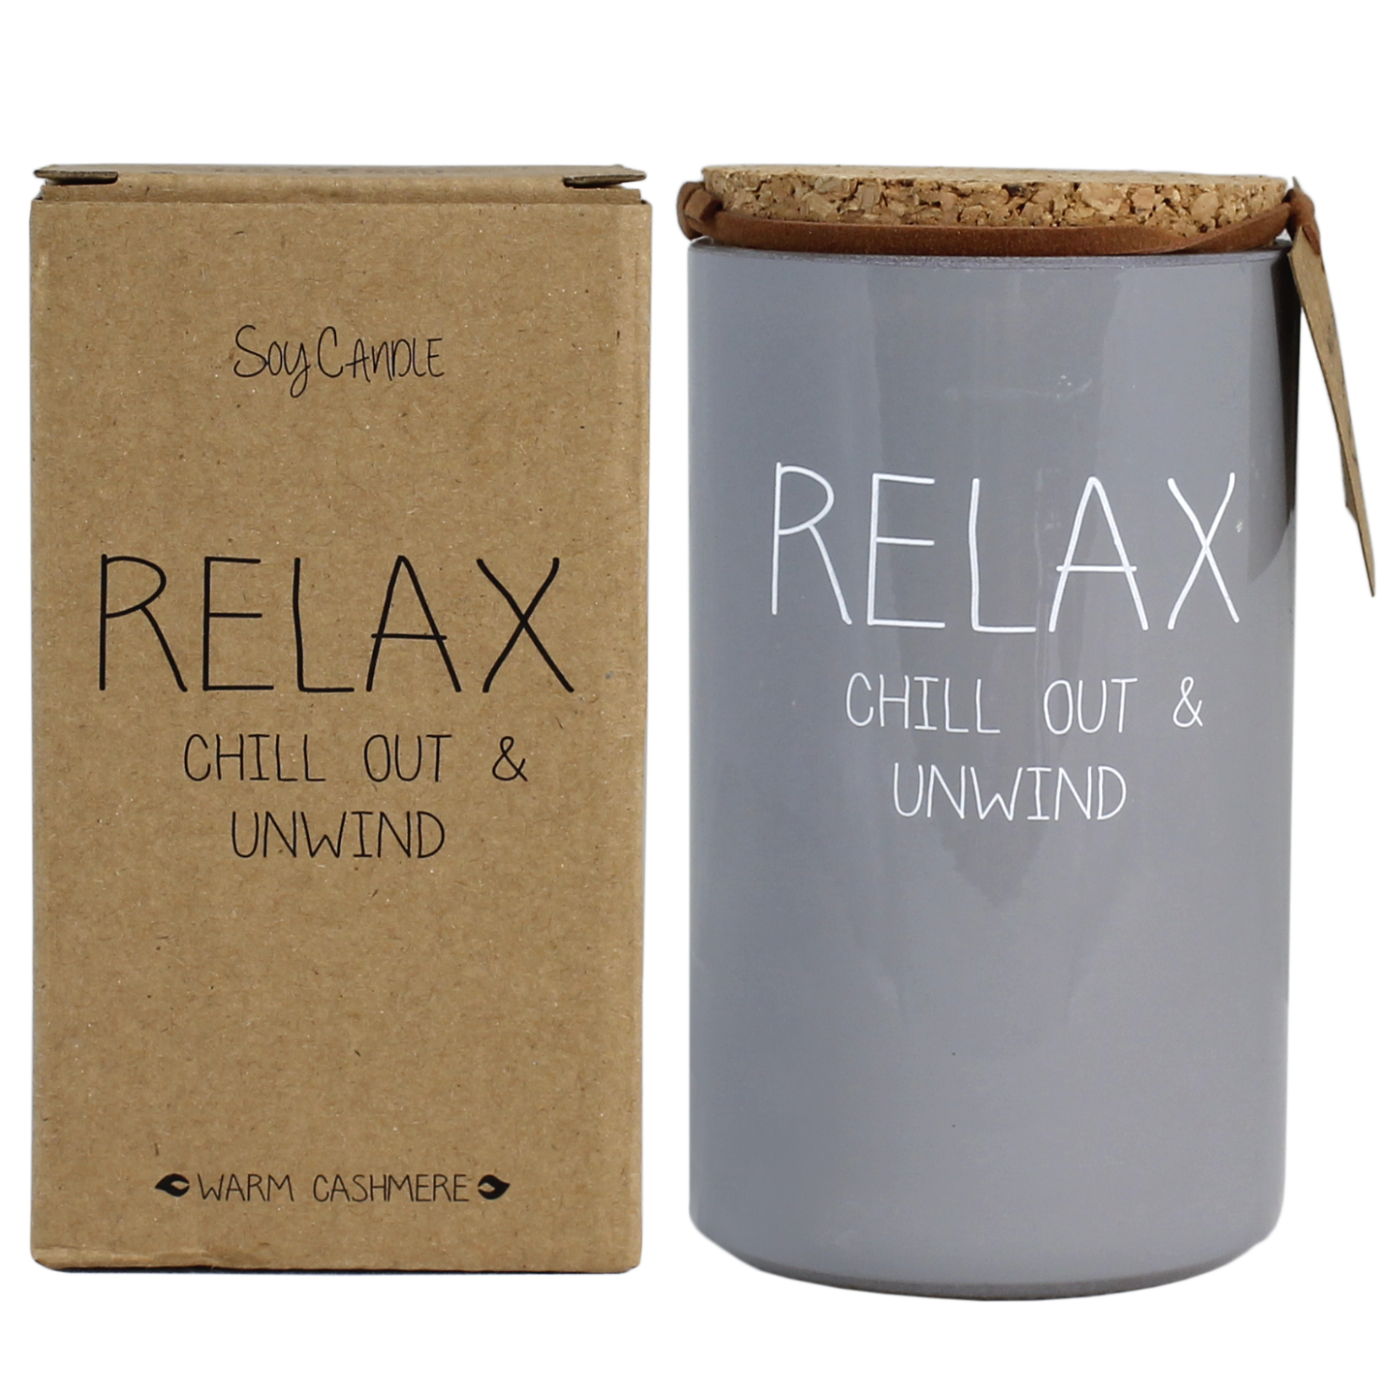 Soy candle - Relax, chill out & unwind - Amber's Secret